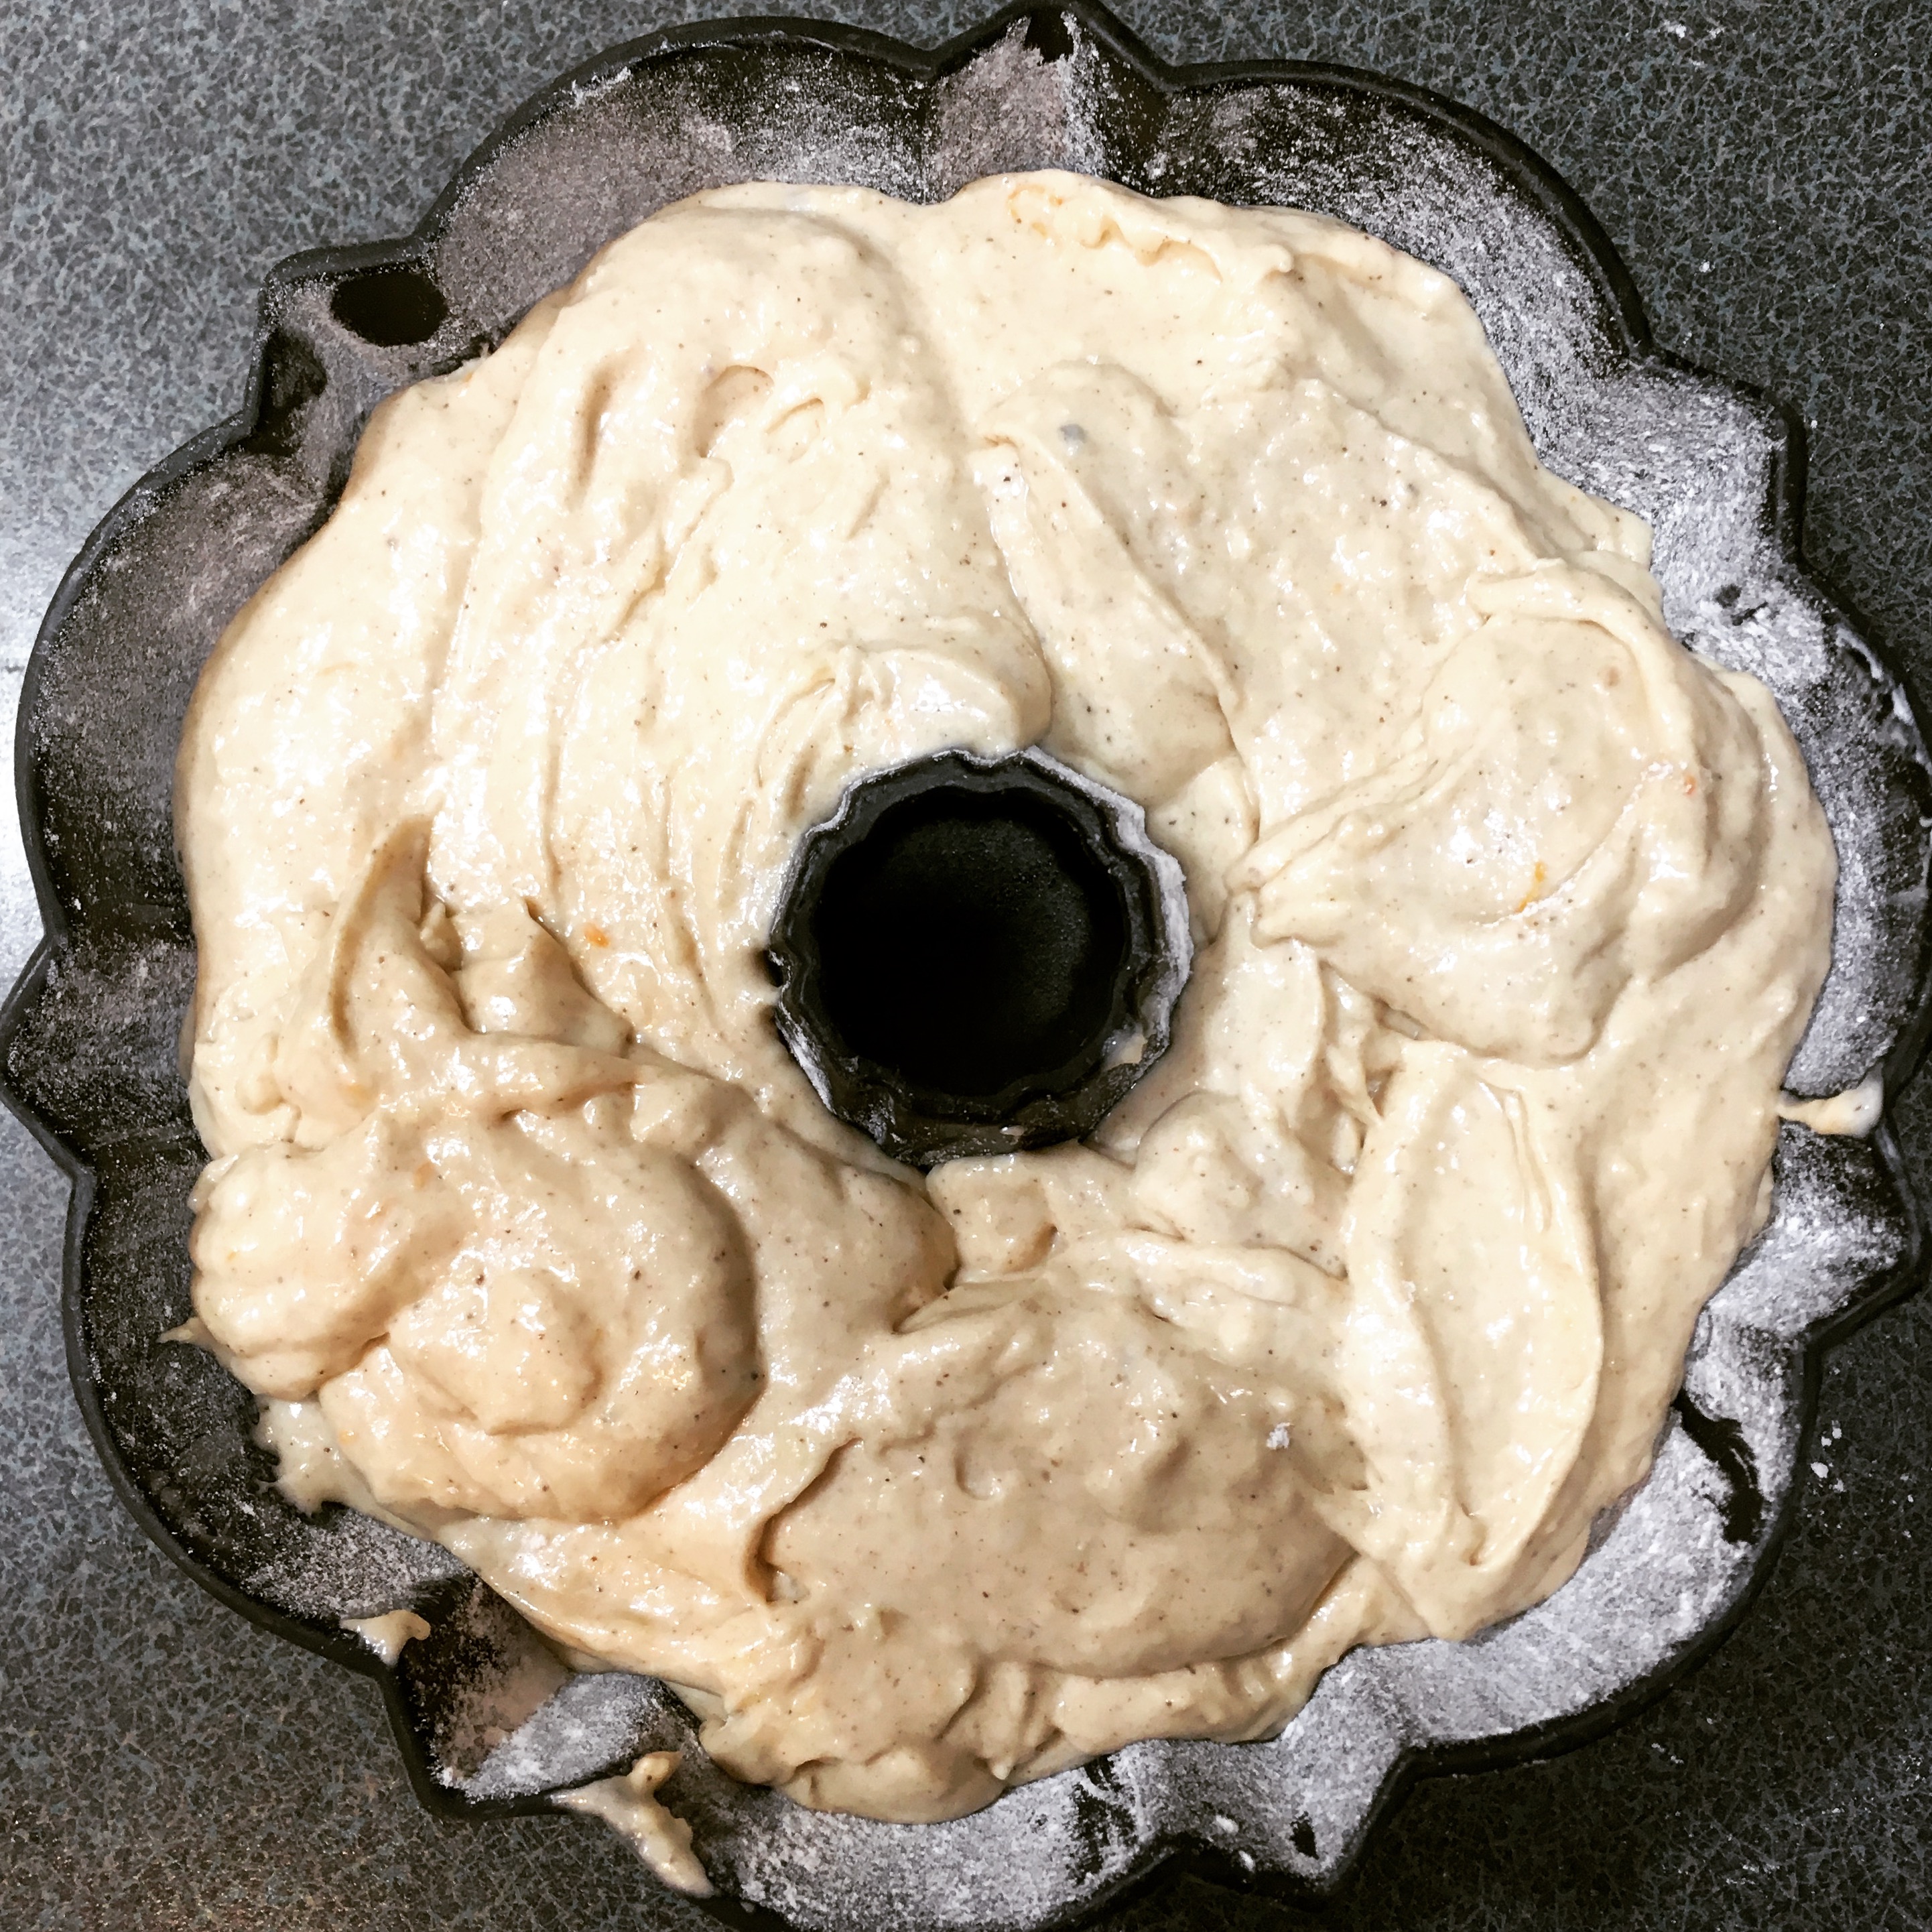 6-cup Bundt Pan with Cake Batter